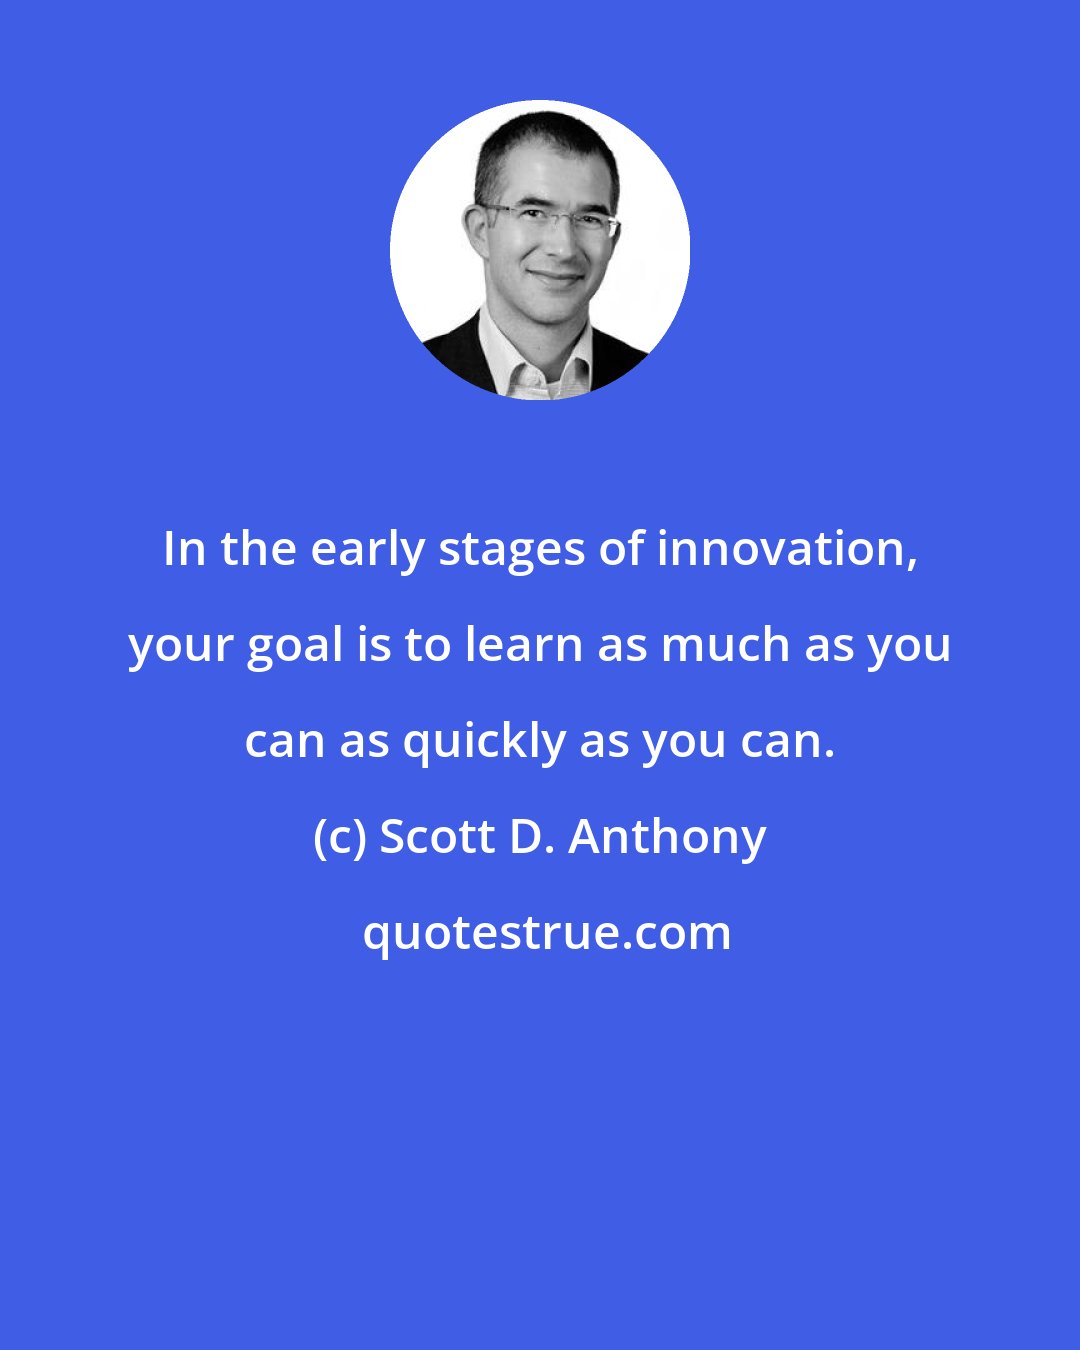 Scott D. Anthony: In the early stages of innovation, your goal is to learn as much as you can as quickly as you can.